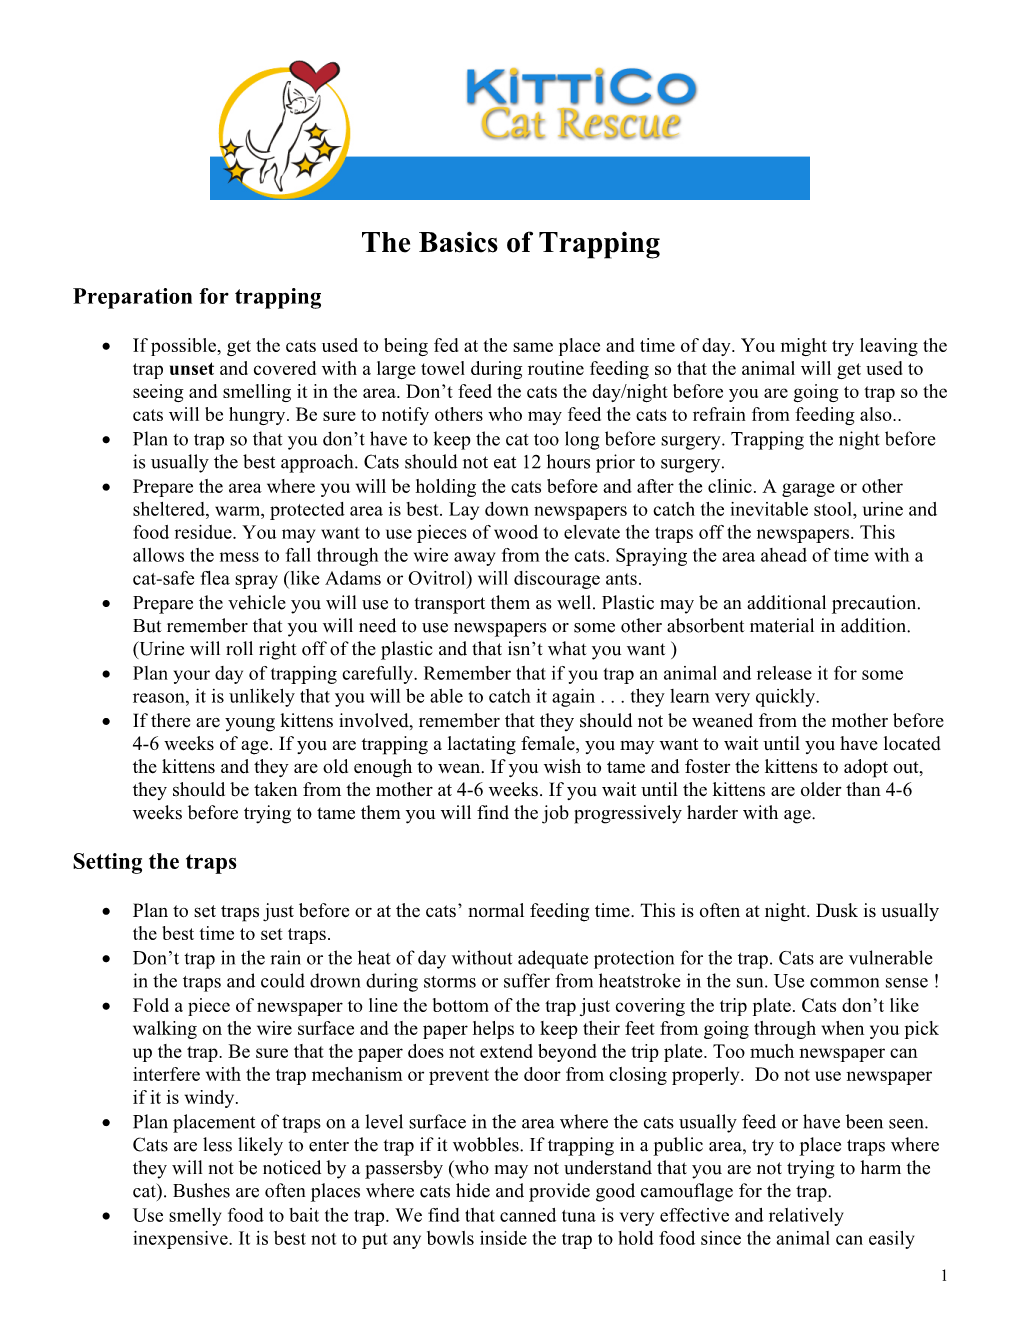 The Basics of Trapping